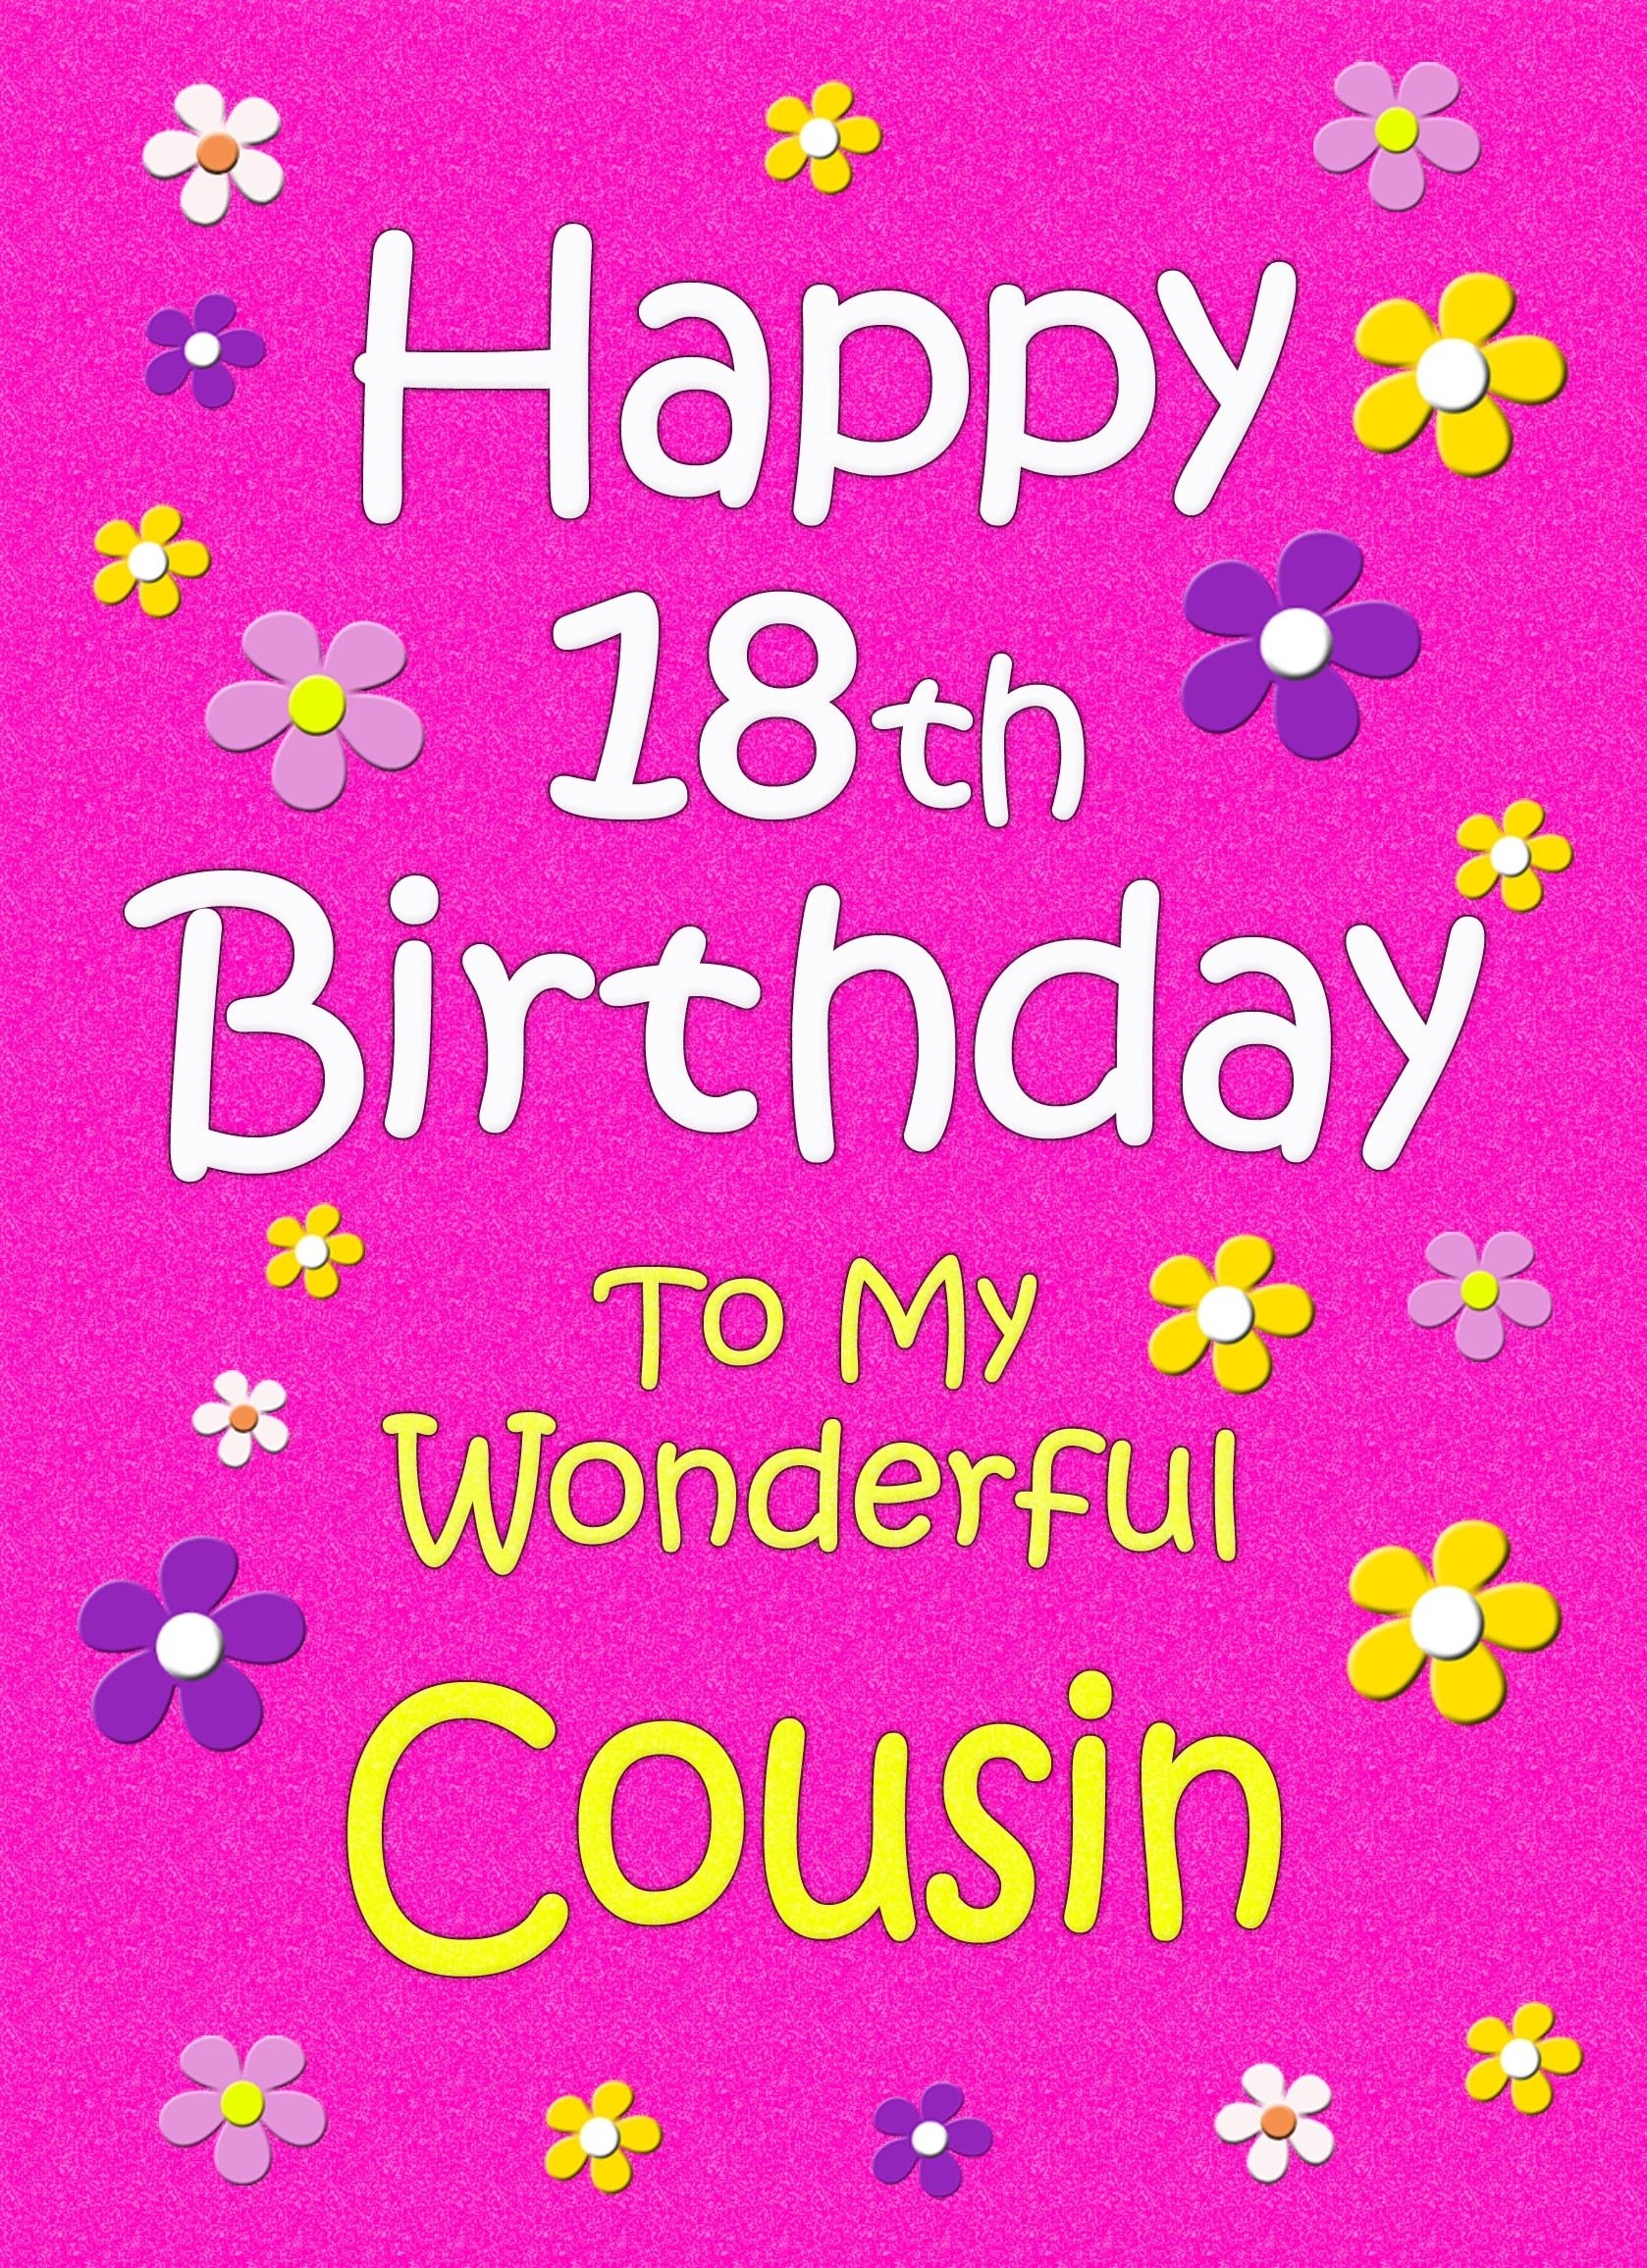 Cousin 18th Birthday Card (Pink)